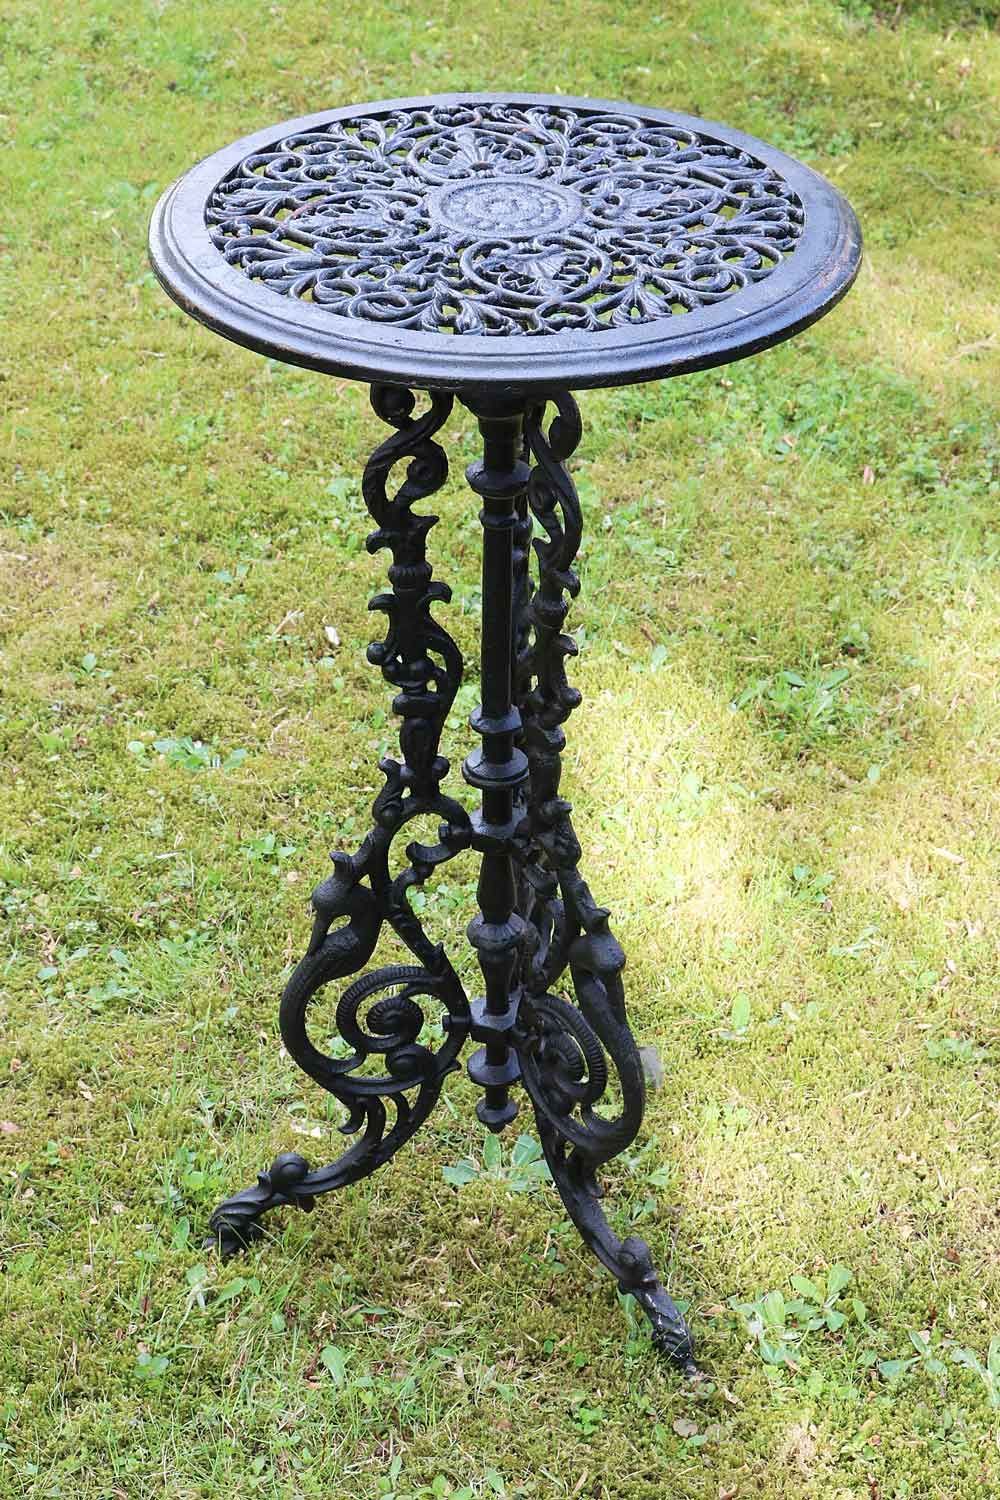 Garden Table 10Kg Cast Iron 72Cm Side Table Iron Antique Style Black | Ebay Regarding Black Iron Outdoor Accent Tables (View 10 of 15)